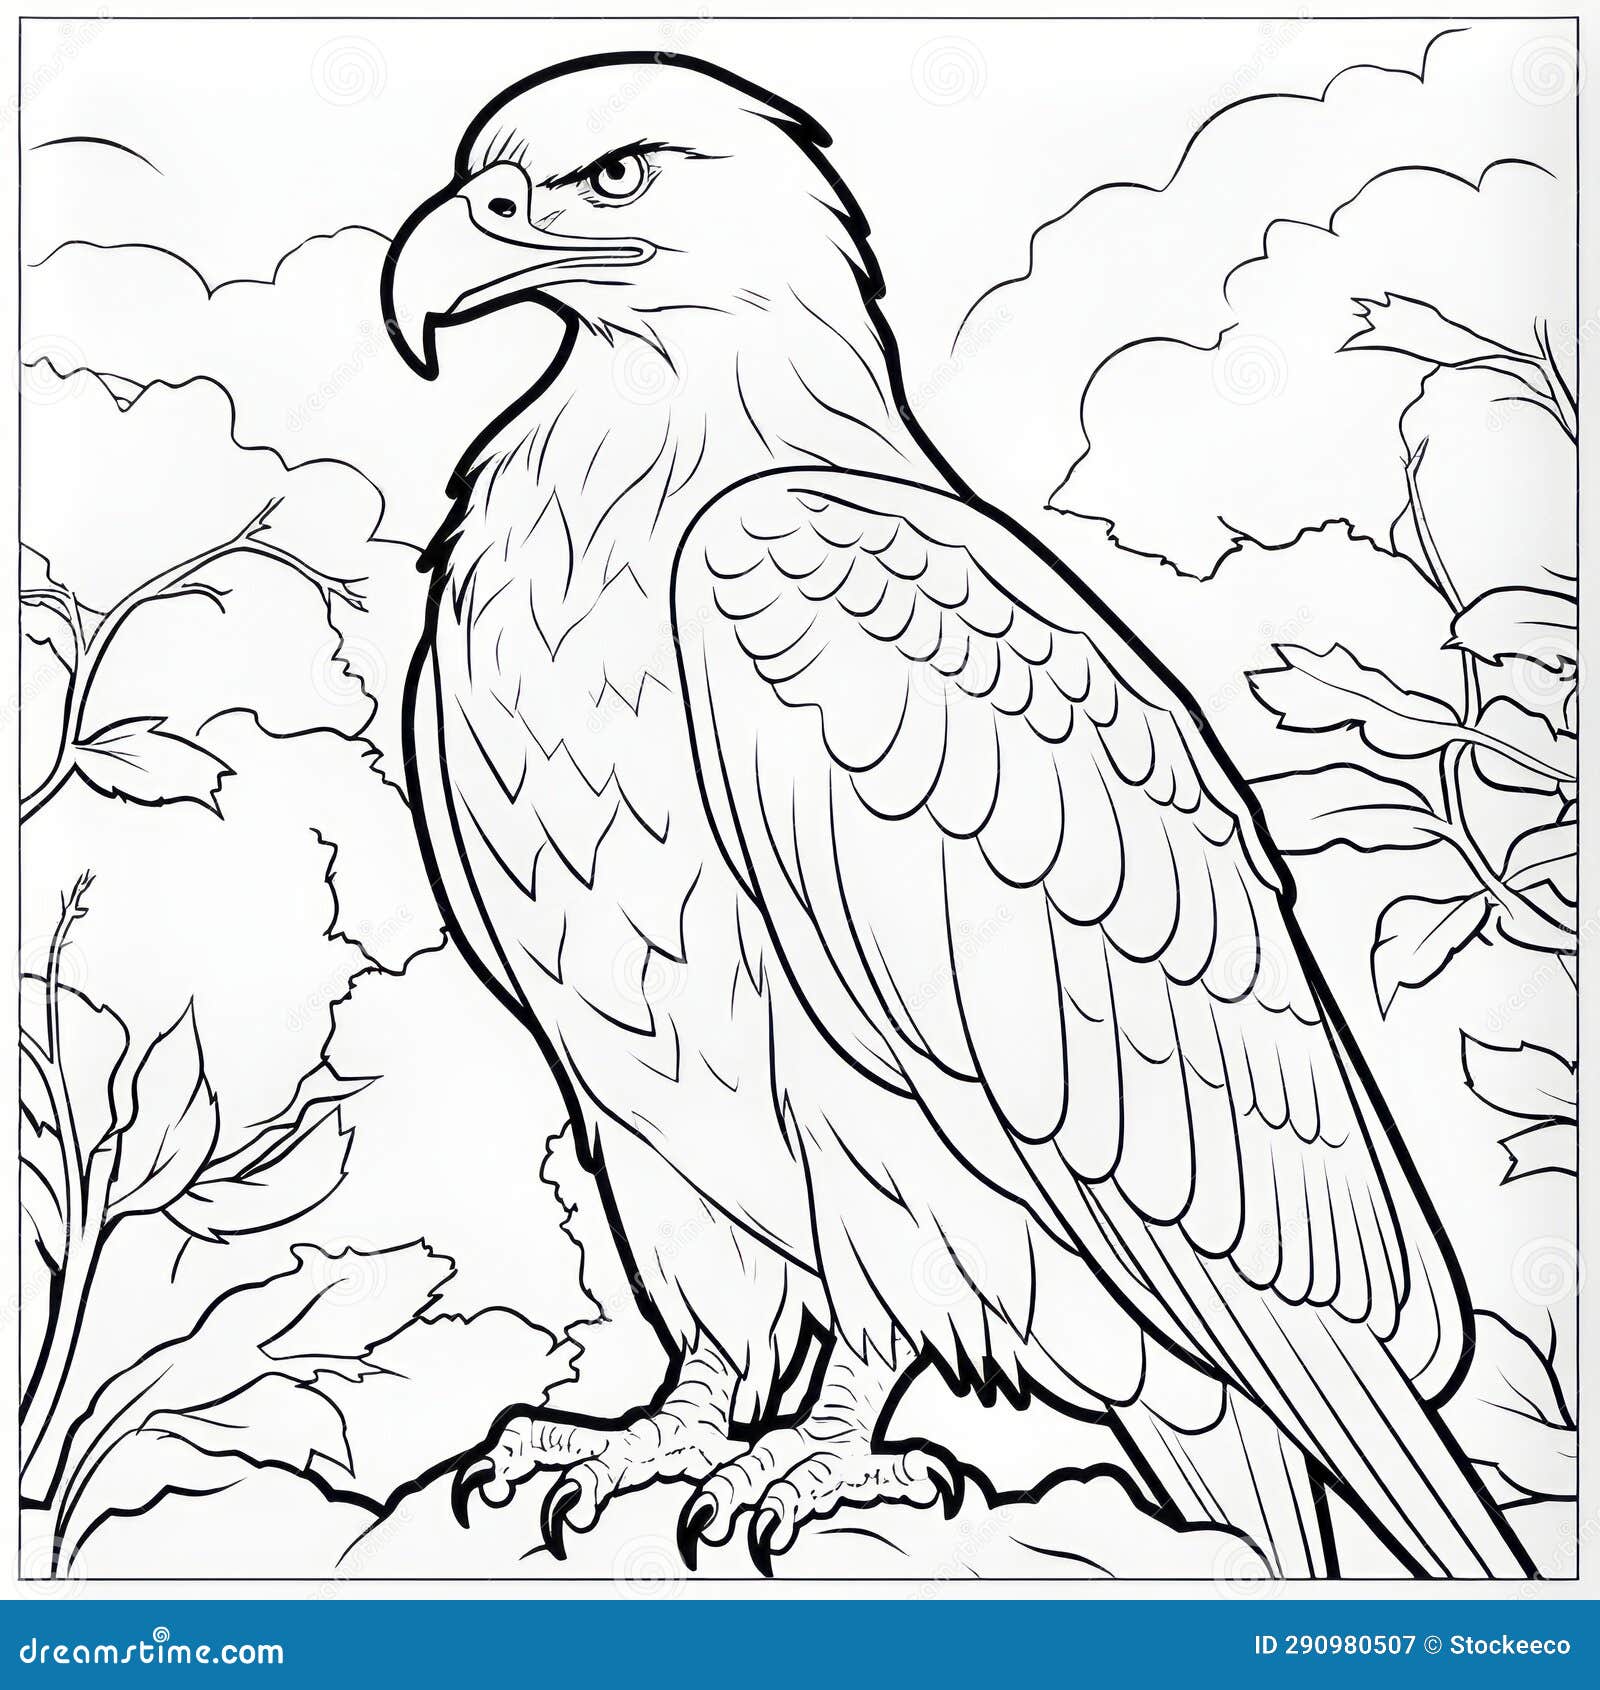 Eagle coloring sheets for kids free download realistic impression stock illustration